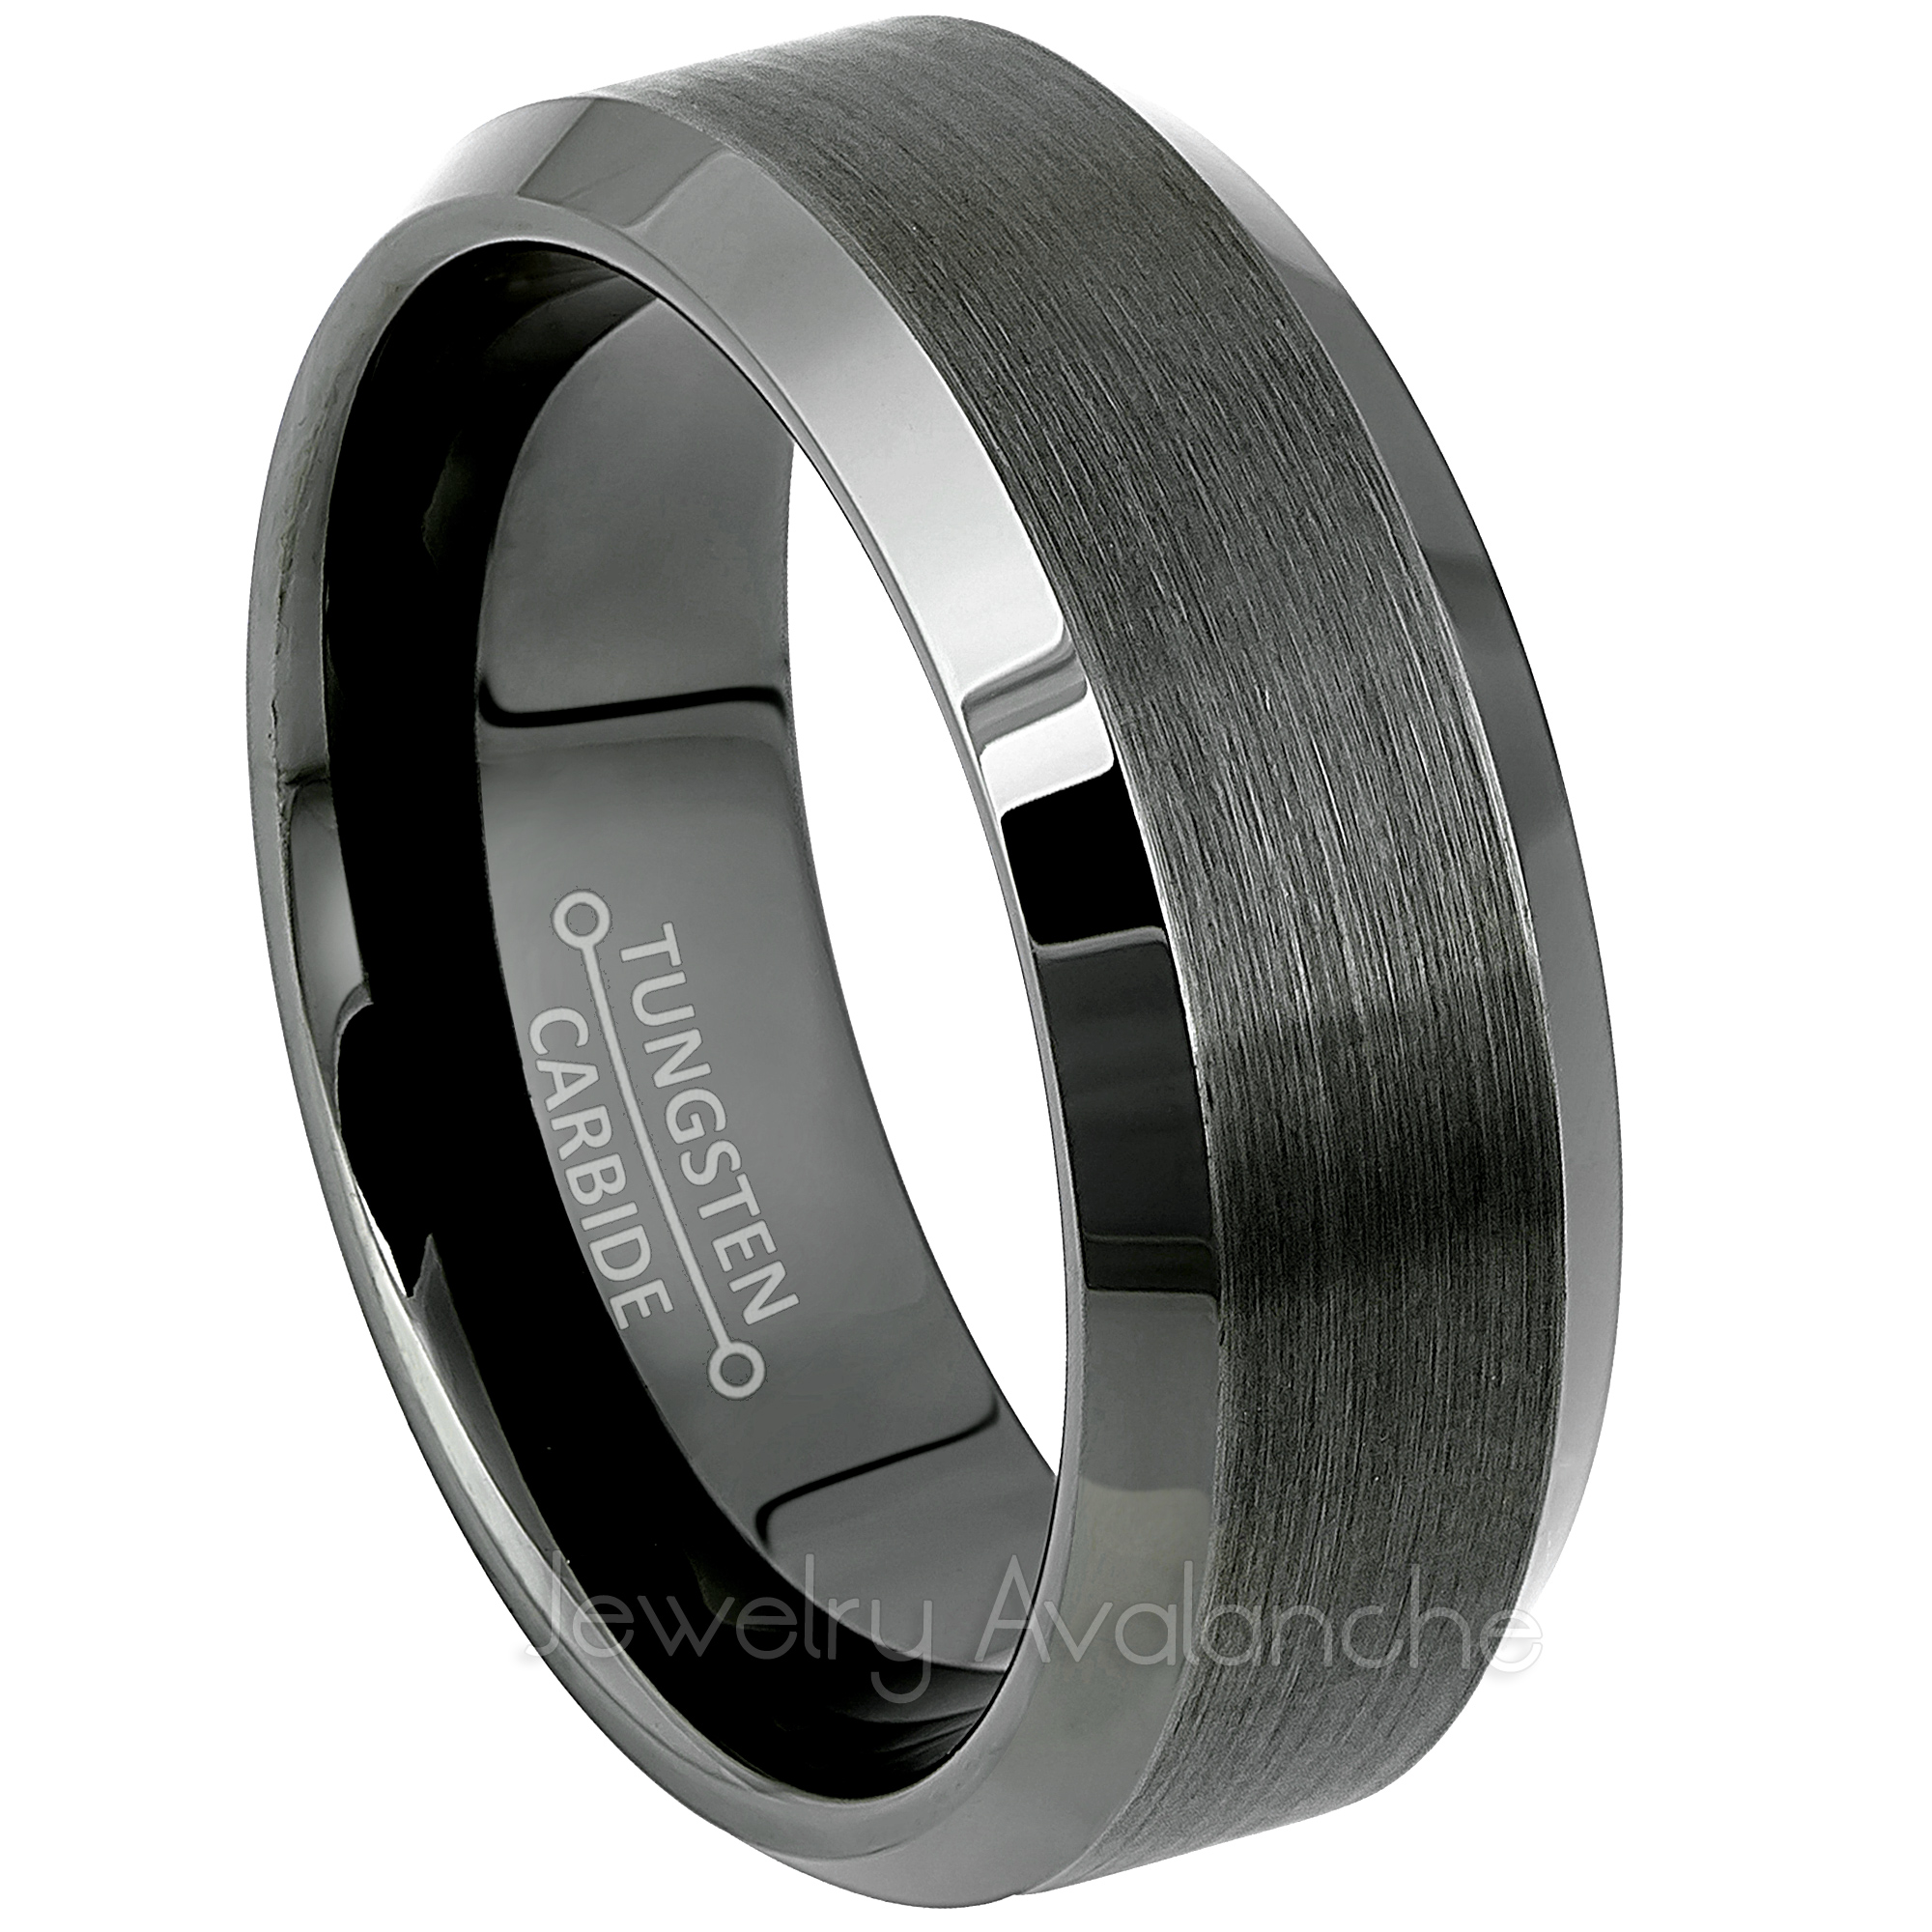 Tungsten Carbide ring Silver Edge black brushed Wedding Band Ring men's jewelry 